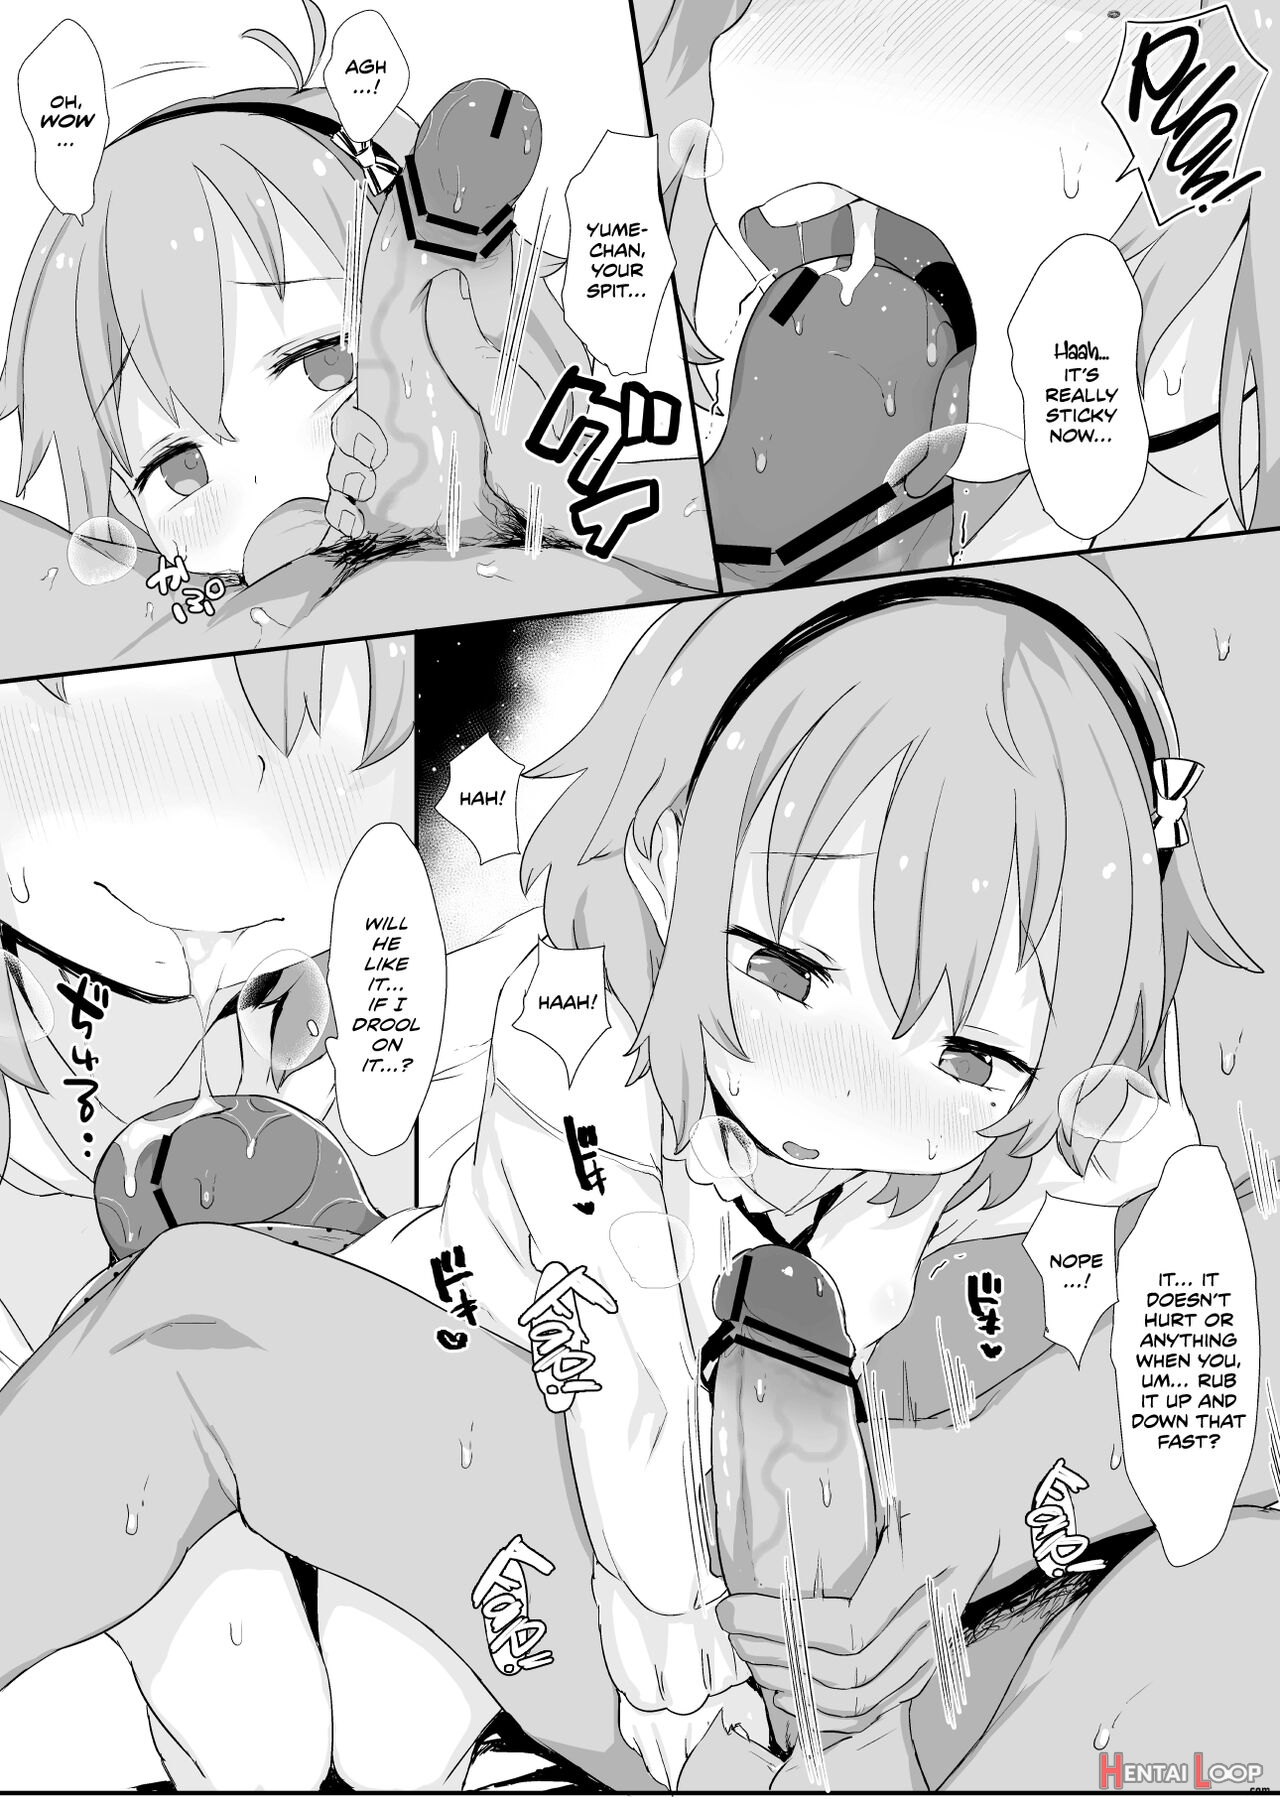 Hot 'n Steamy Babymaking Sex With Yume-chan! page 10